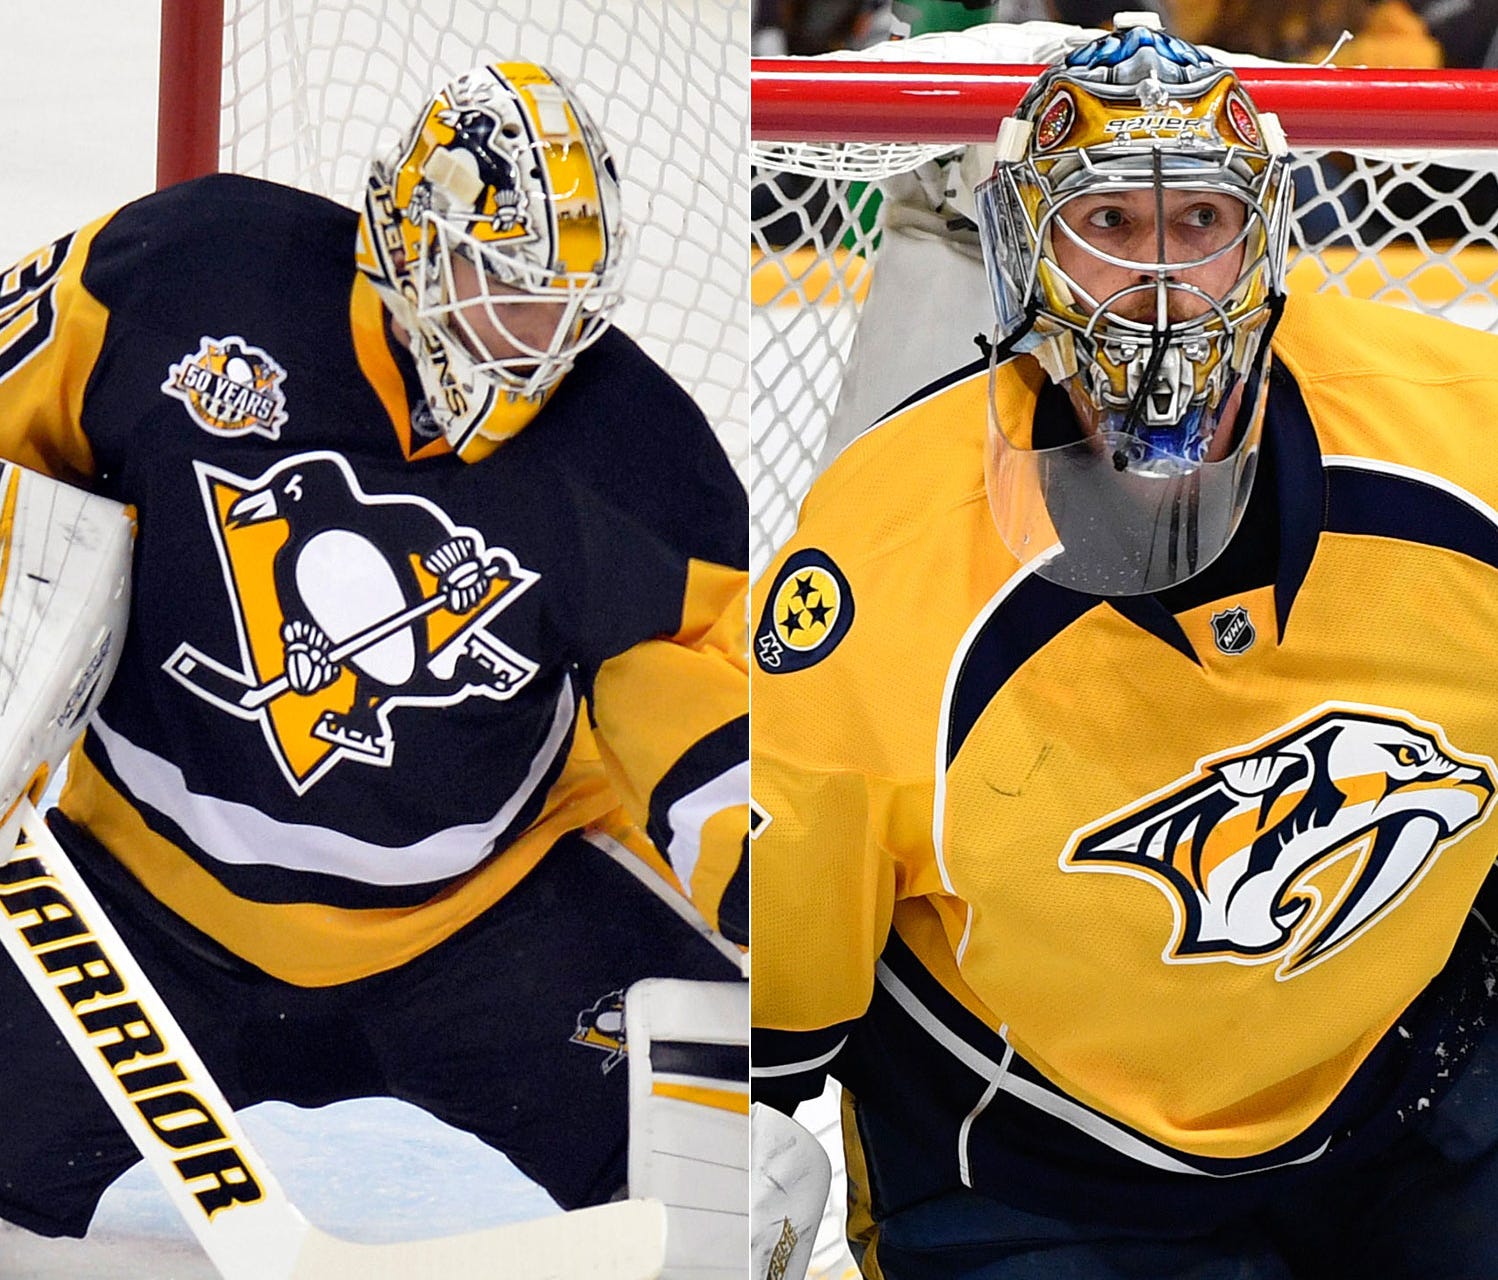 Penguins goalie Matt Murray (left) is looking to win his second consecutive Stanley Cup, while Pekka Rinne (right) and the Predators are aiming to win their first.